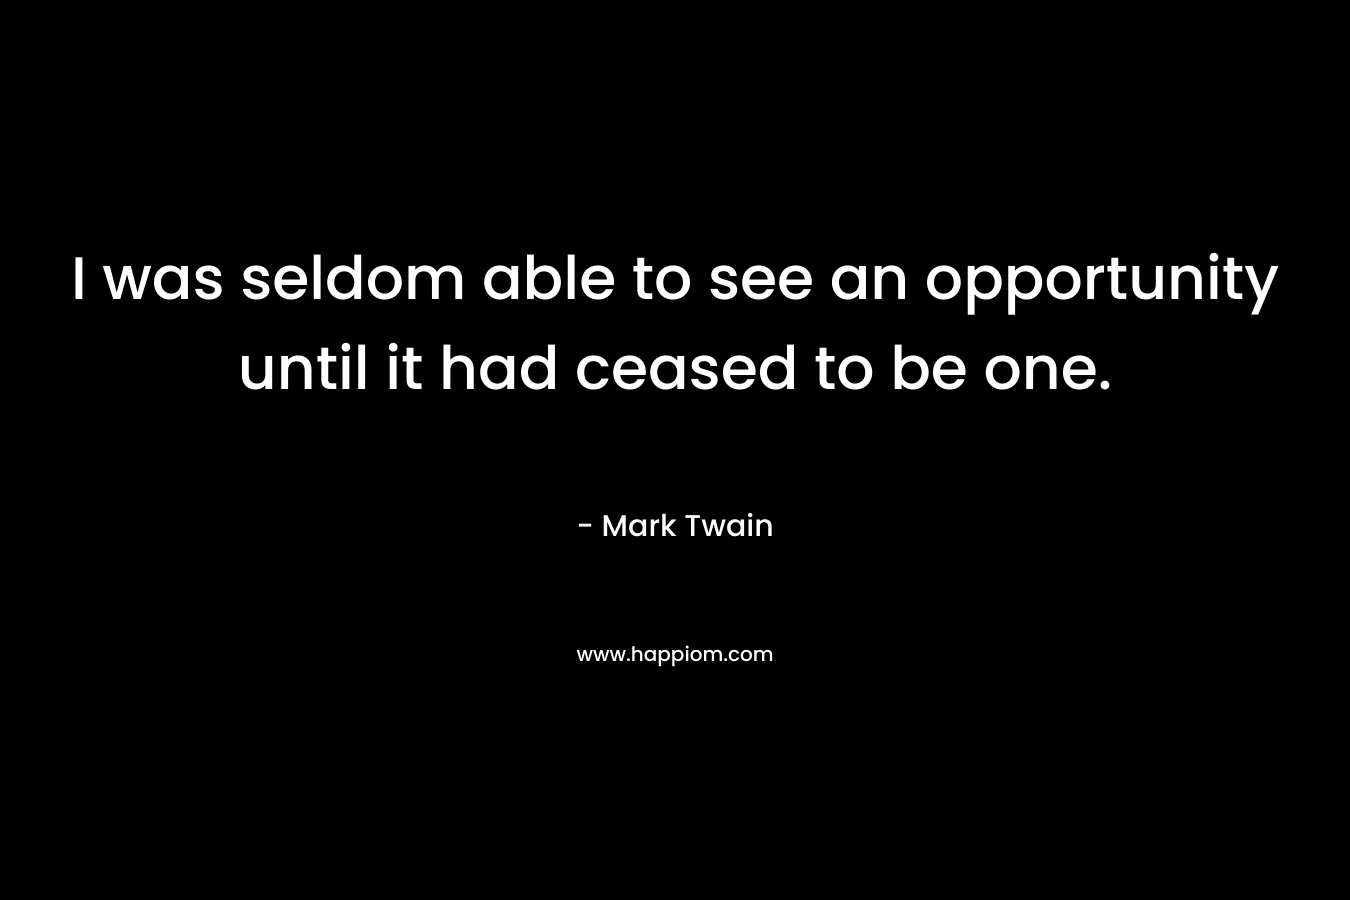 I was seldom able to see an opportunity until it had ceased to be one. – Mark Twain